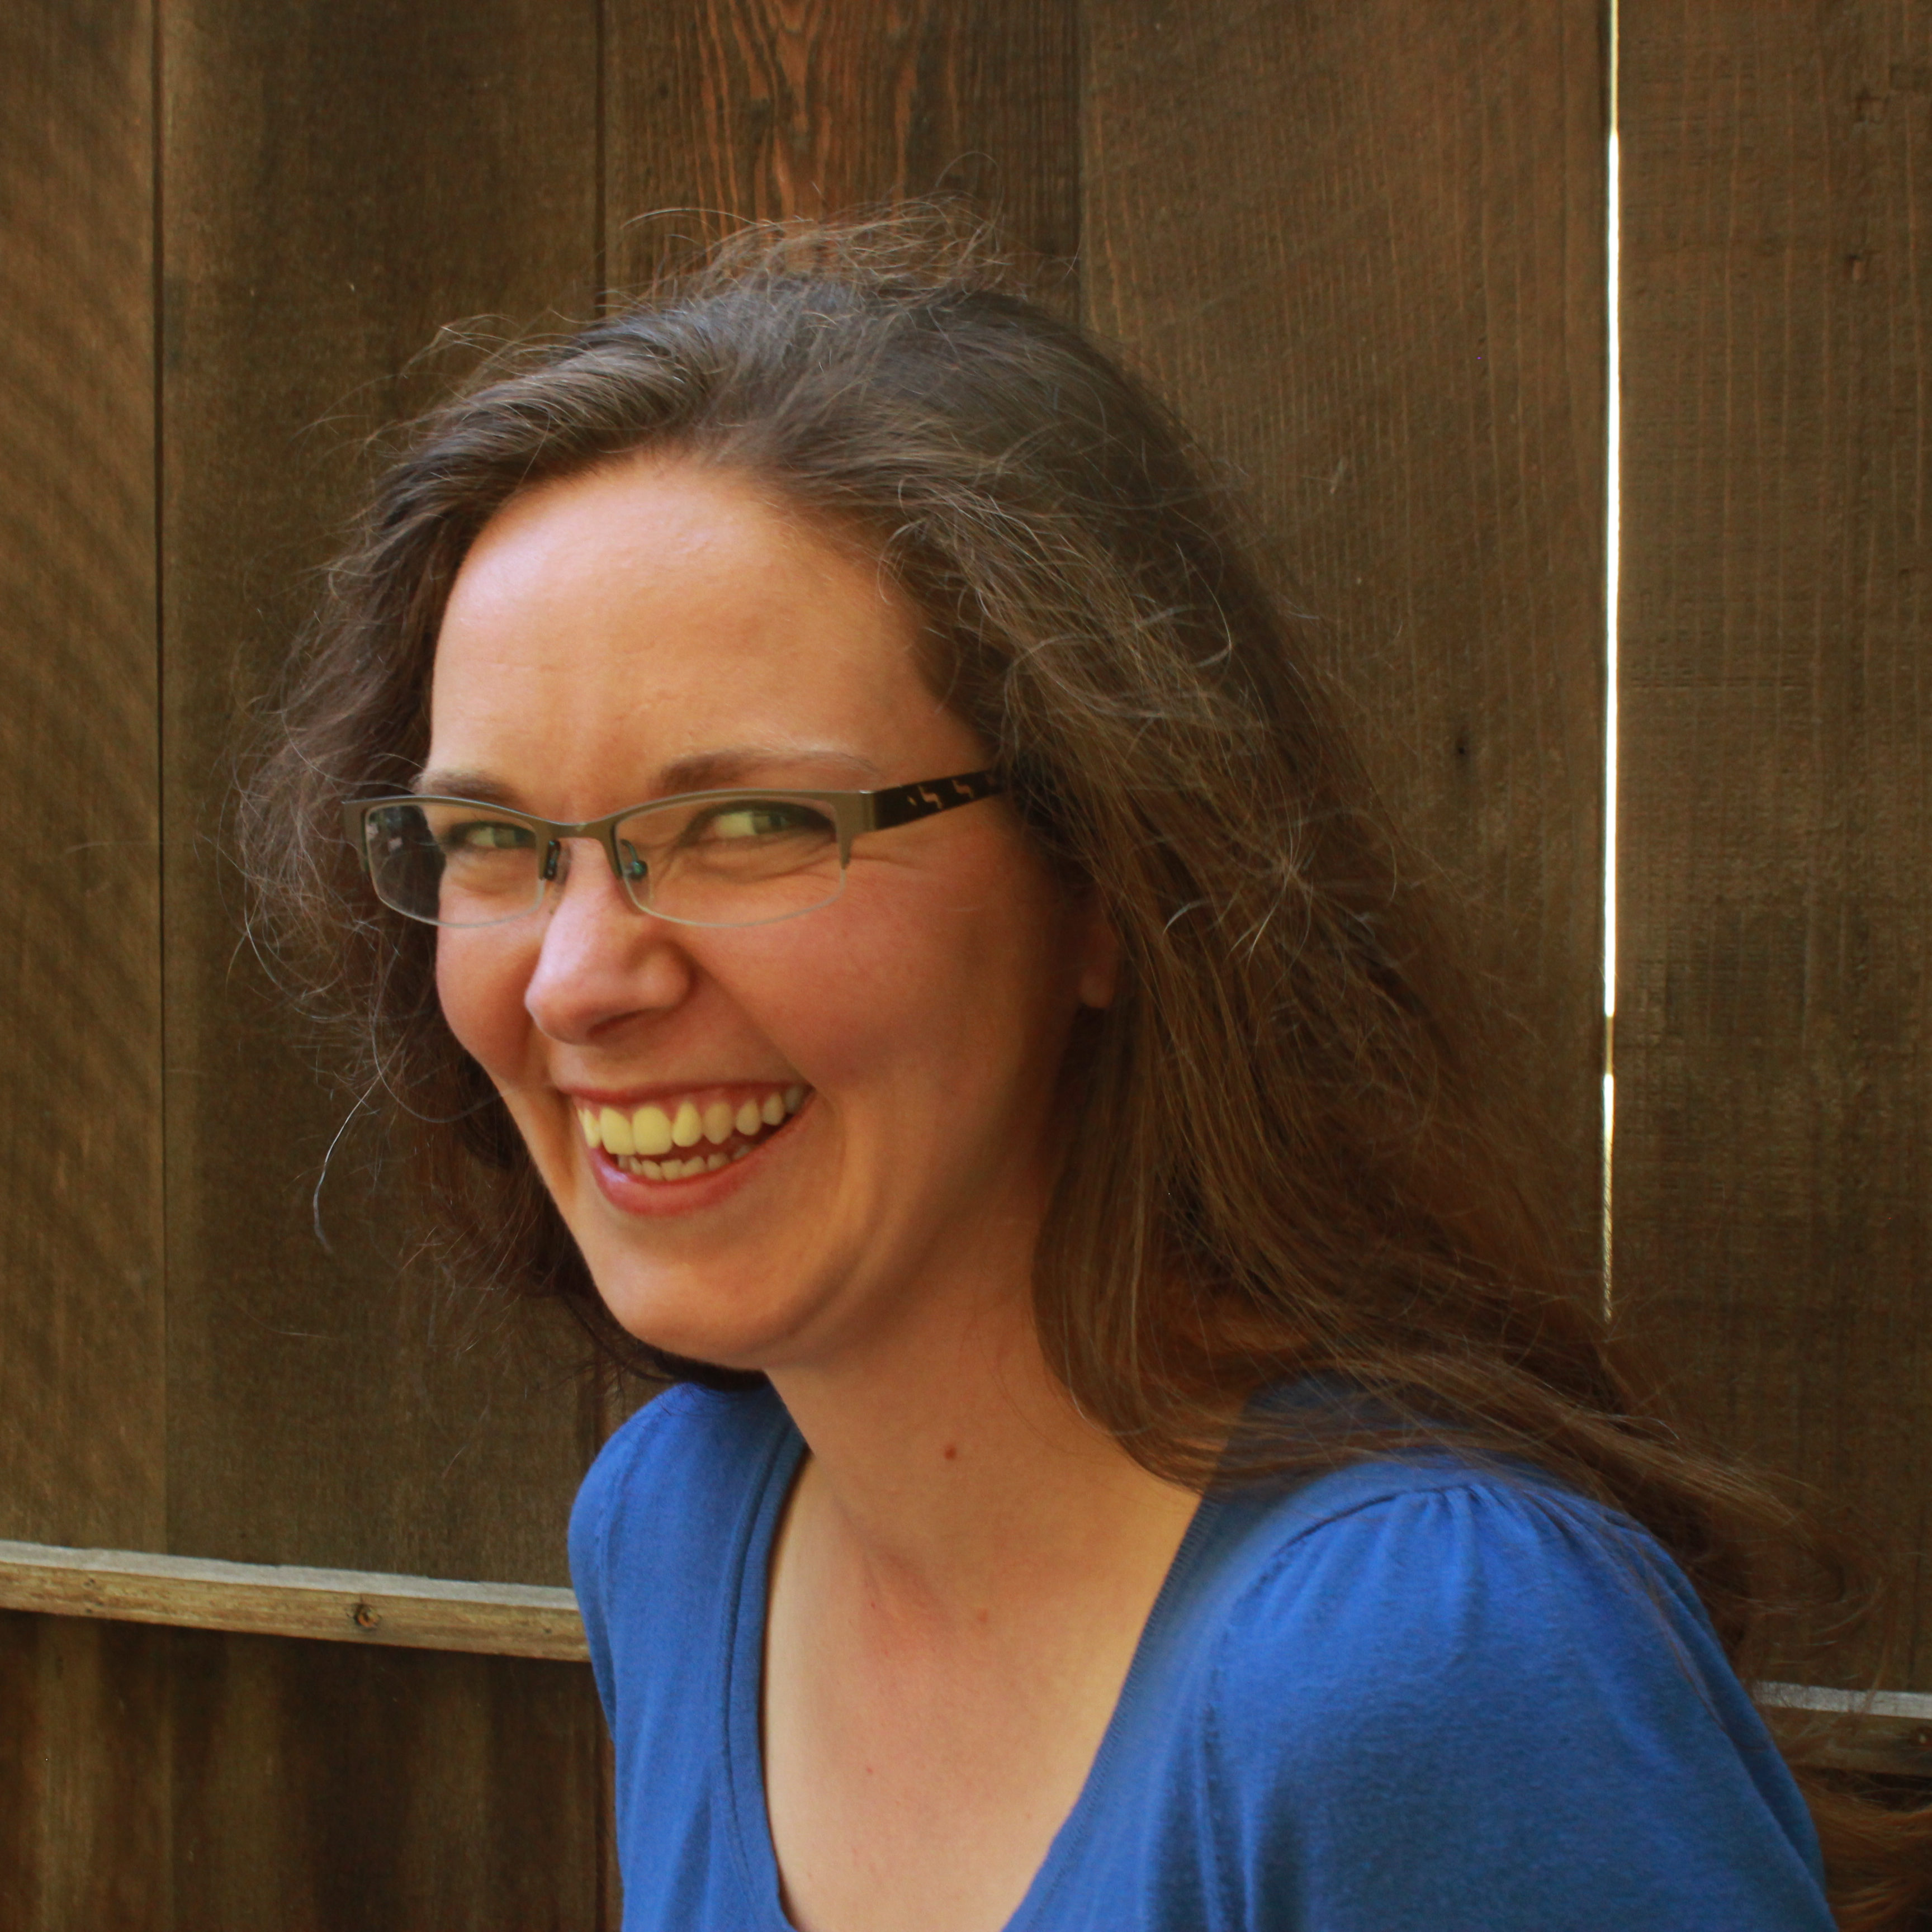 Mary Ruppert laughing in front of a wooden fence